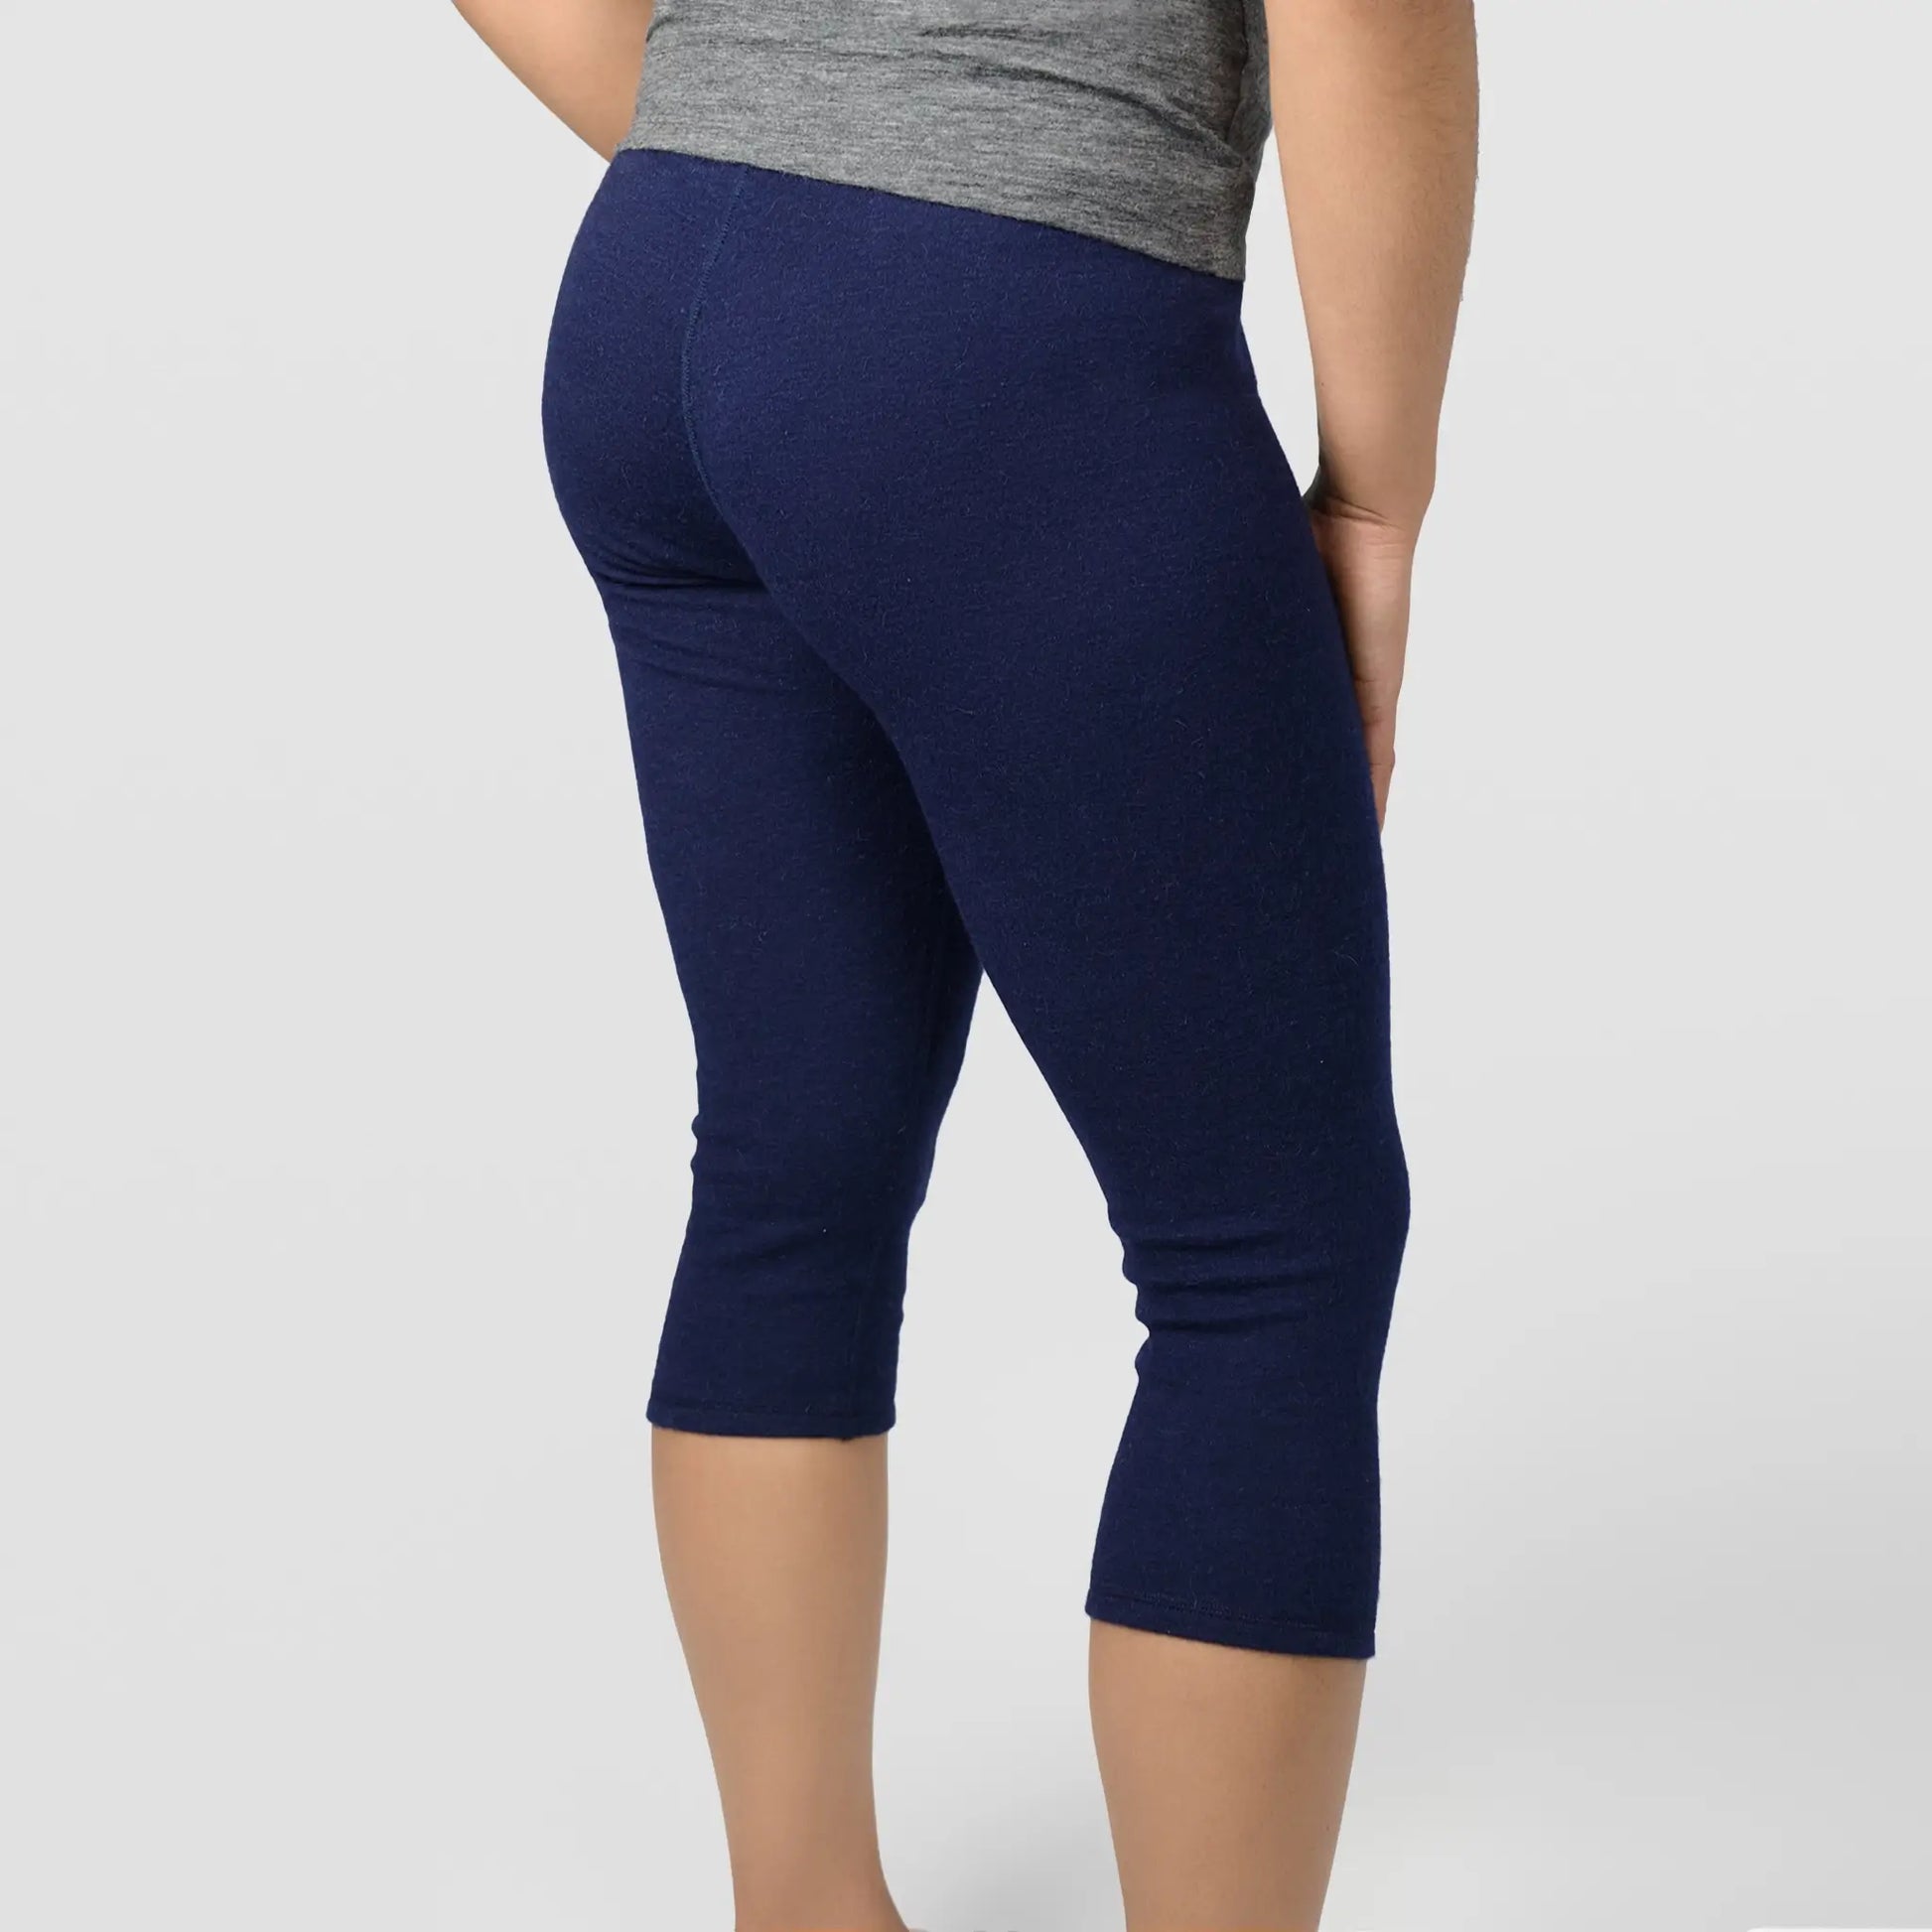 womens low moisture absorption leggings 34 midweight color navy blue